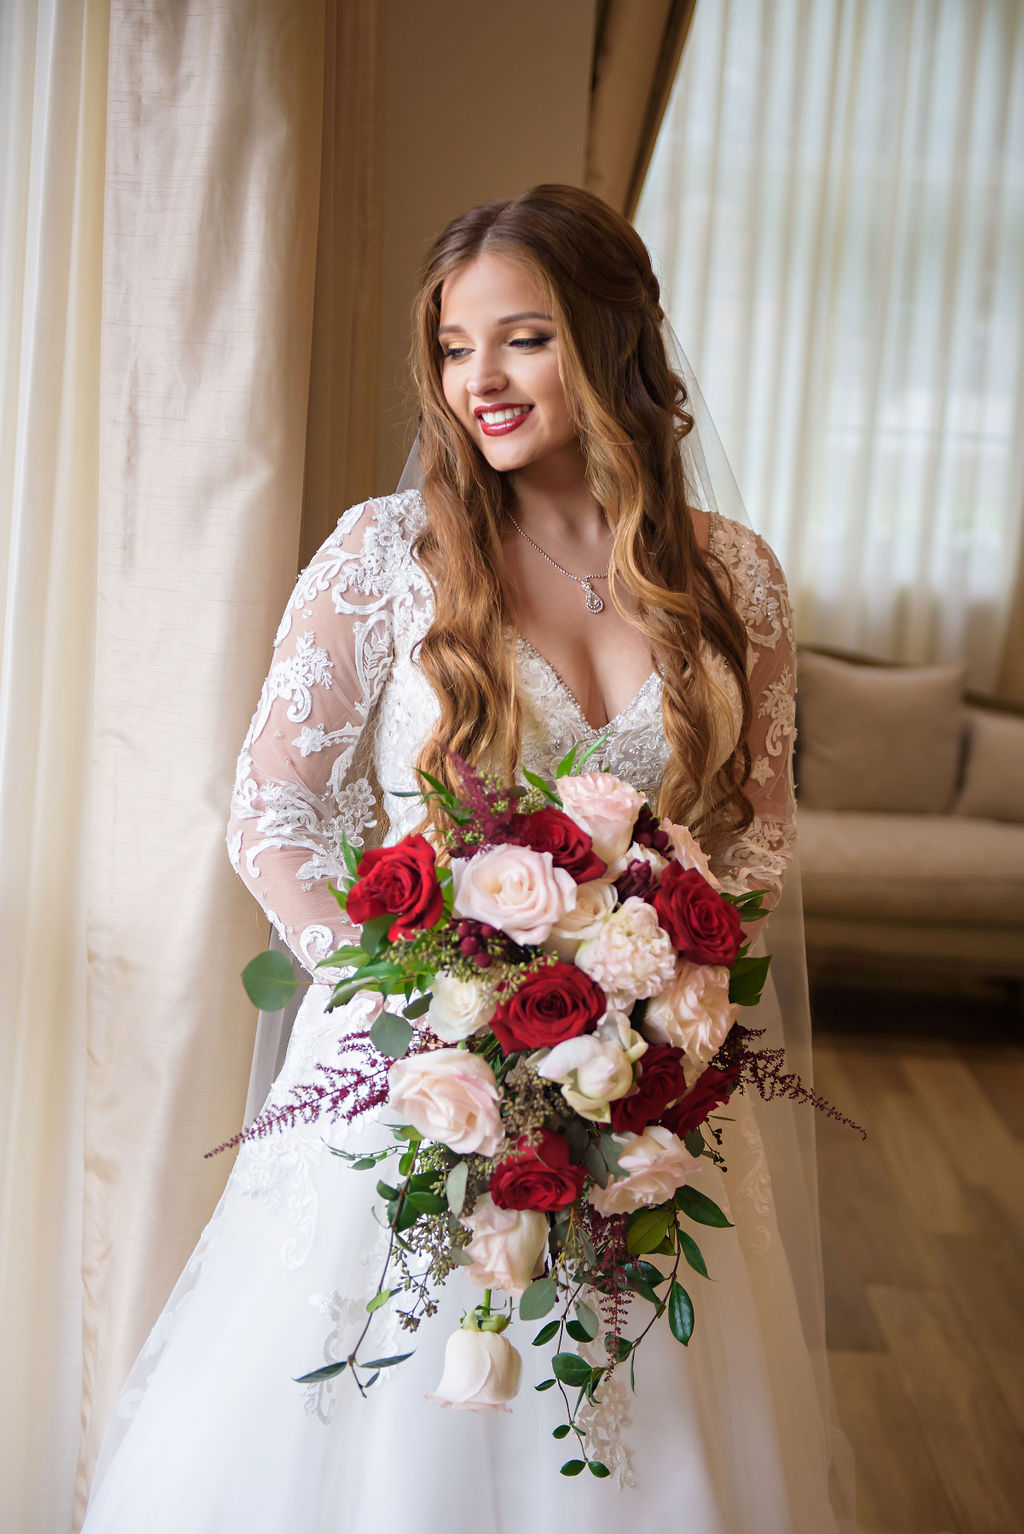 Florida Bride Wedding Portrait in Lace and Illusion Long Sleeve Deep V Neckline Ballgown Wedding Dress and Red, Blush Pink, Ivory, Greenery Floral Bouquet | Tampa Bay Hair and Makeup Destiny and Light Hair and Makeup Group | Wedding Dress Shop Truly Forever Bridal